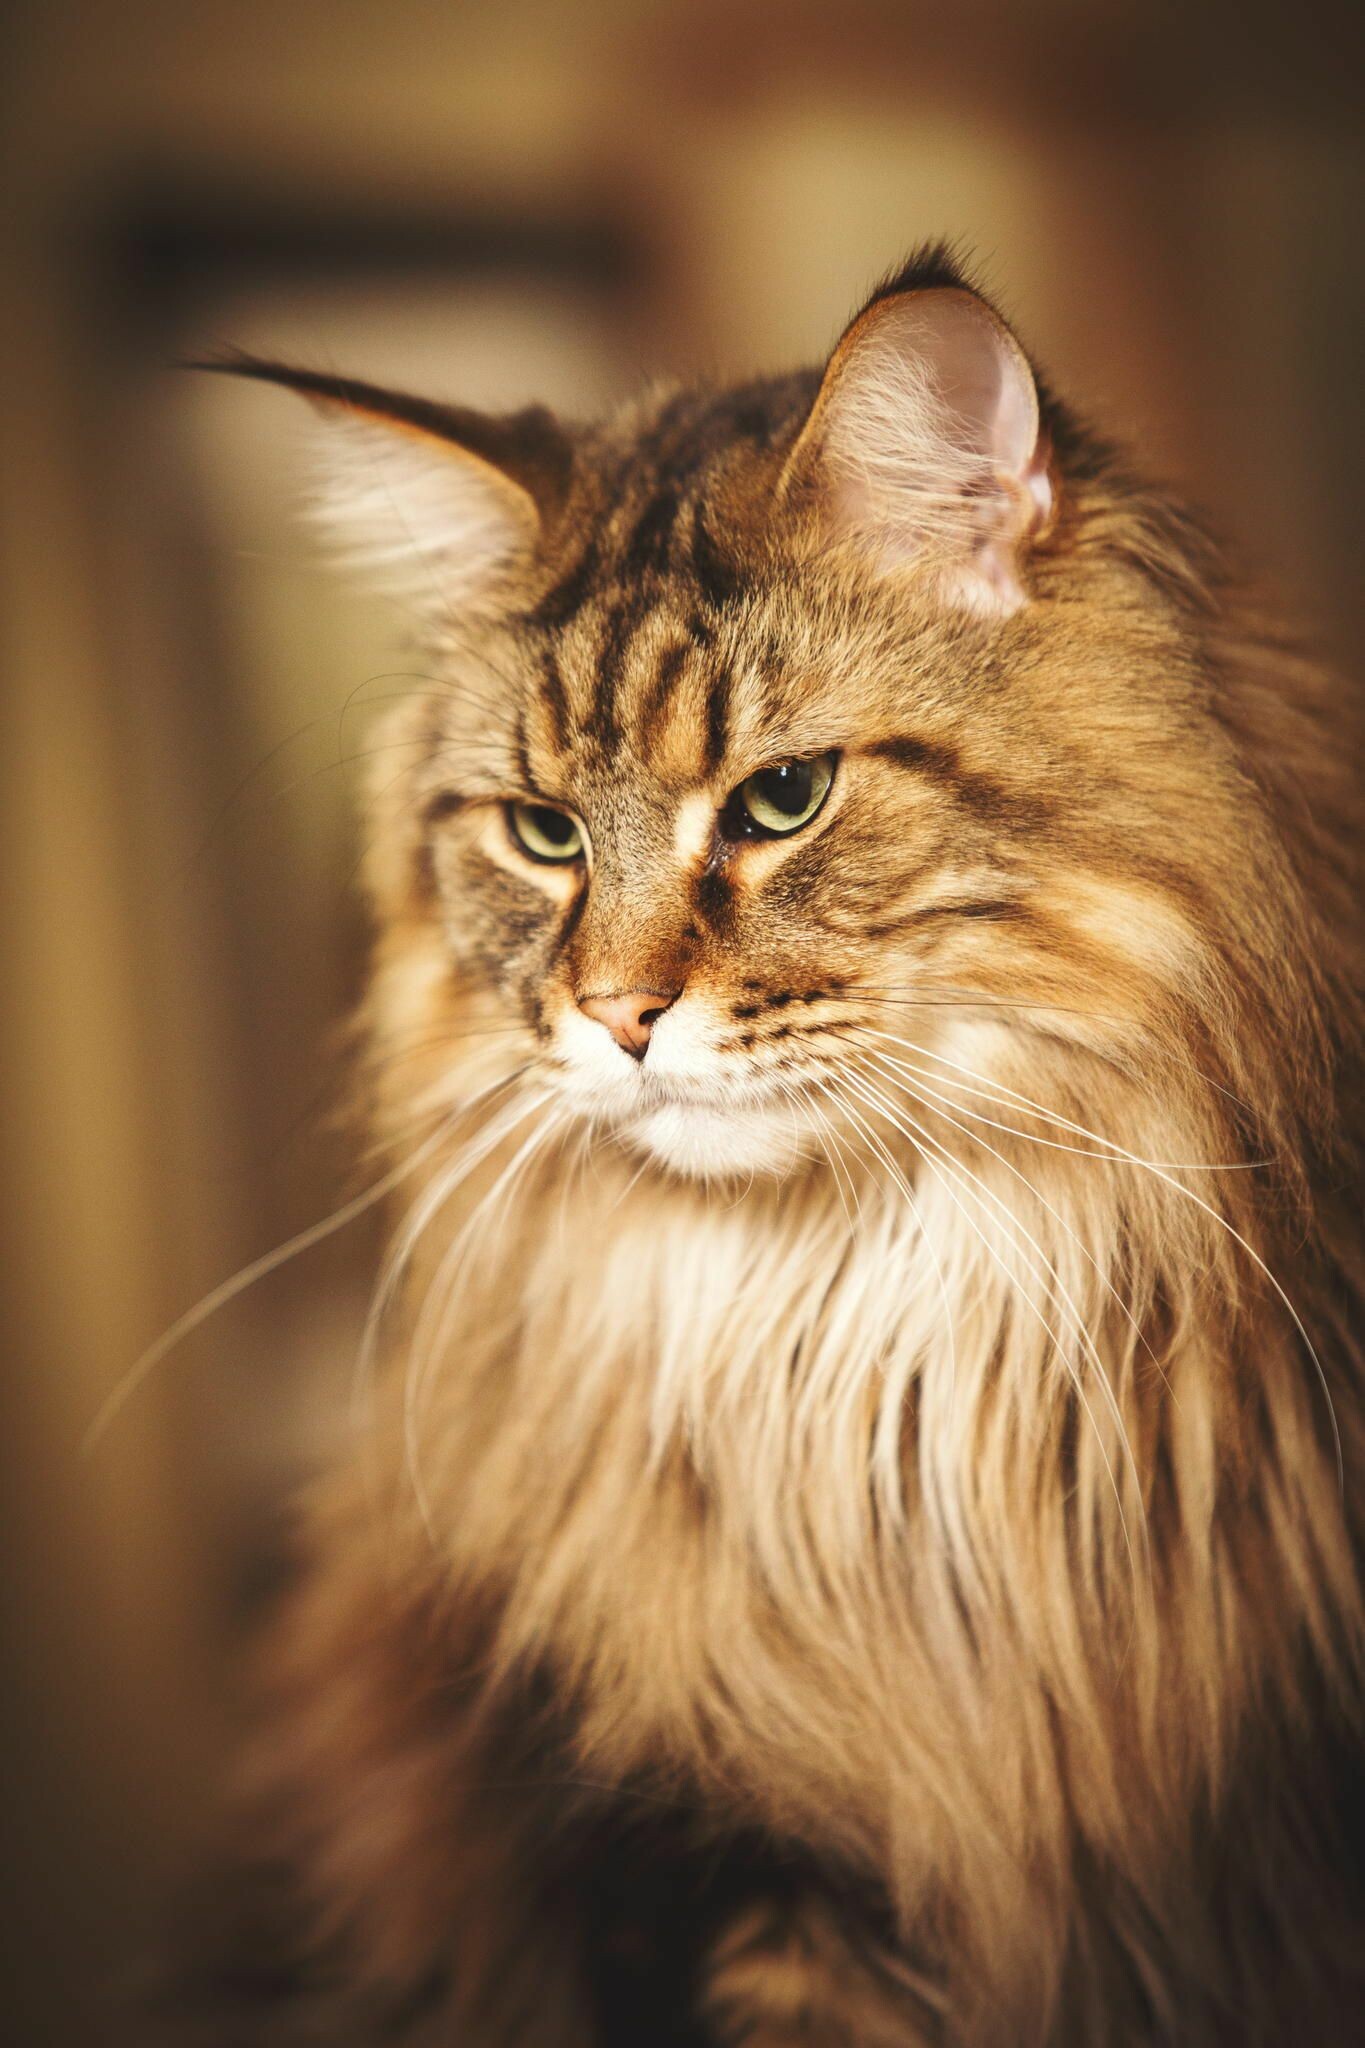 Maine Coon: Long tufts of fur growing between their toes help keep the toes warm and further aid walking on snow by giving the paws additional structure without significant extra weight. 1370x2050 HD Background.